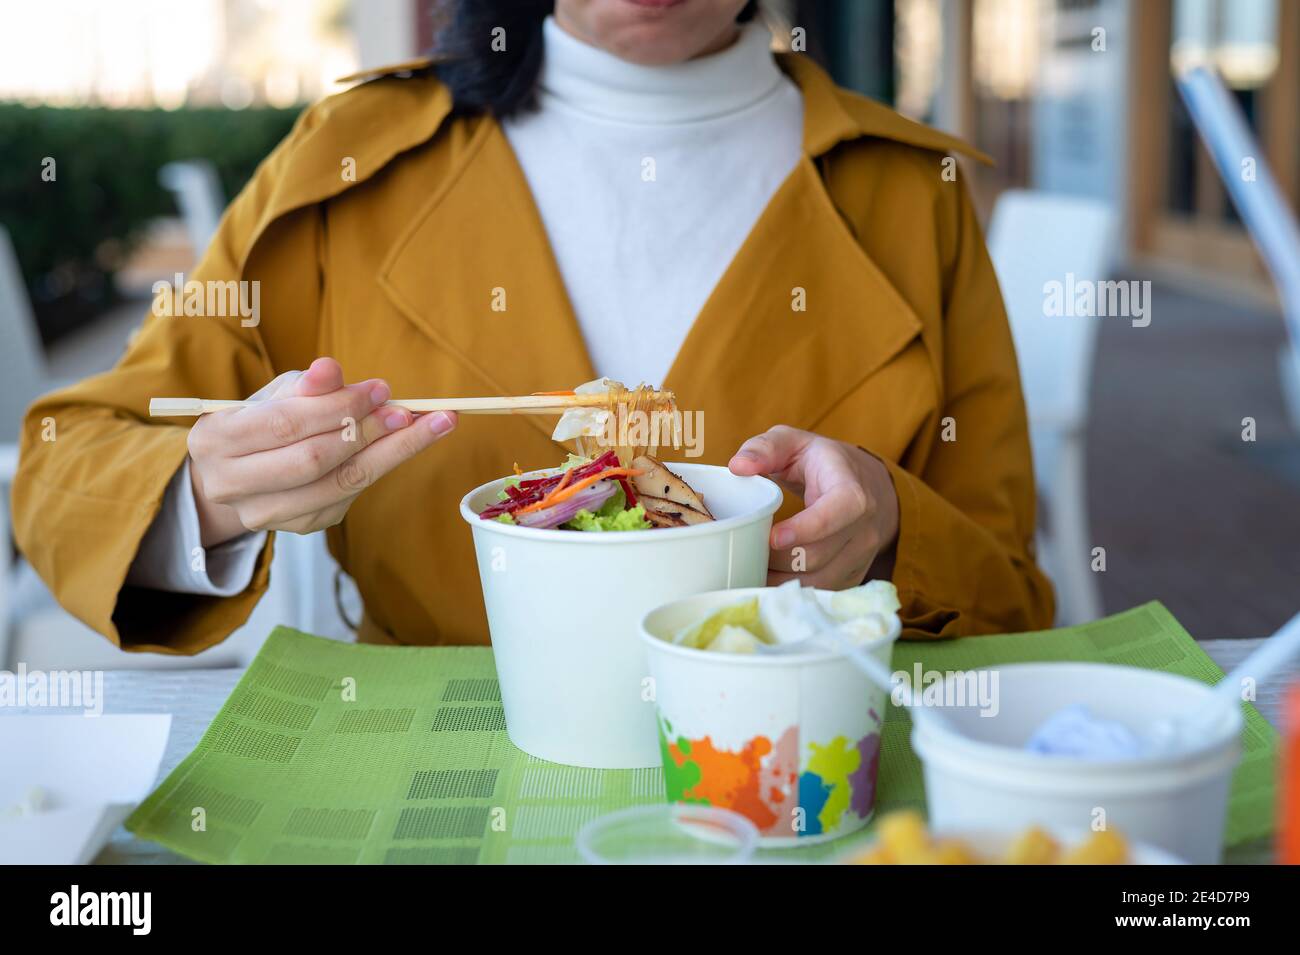 Woman having noodles meal using chopsticks in the restaurant from the paper box closeup Stock Photo